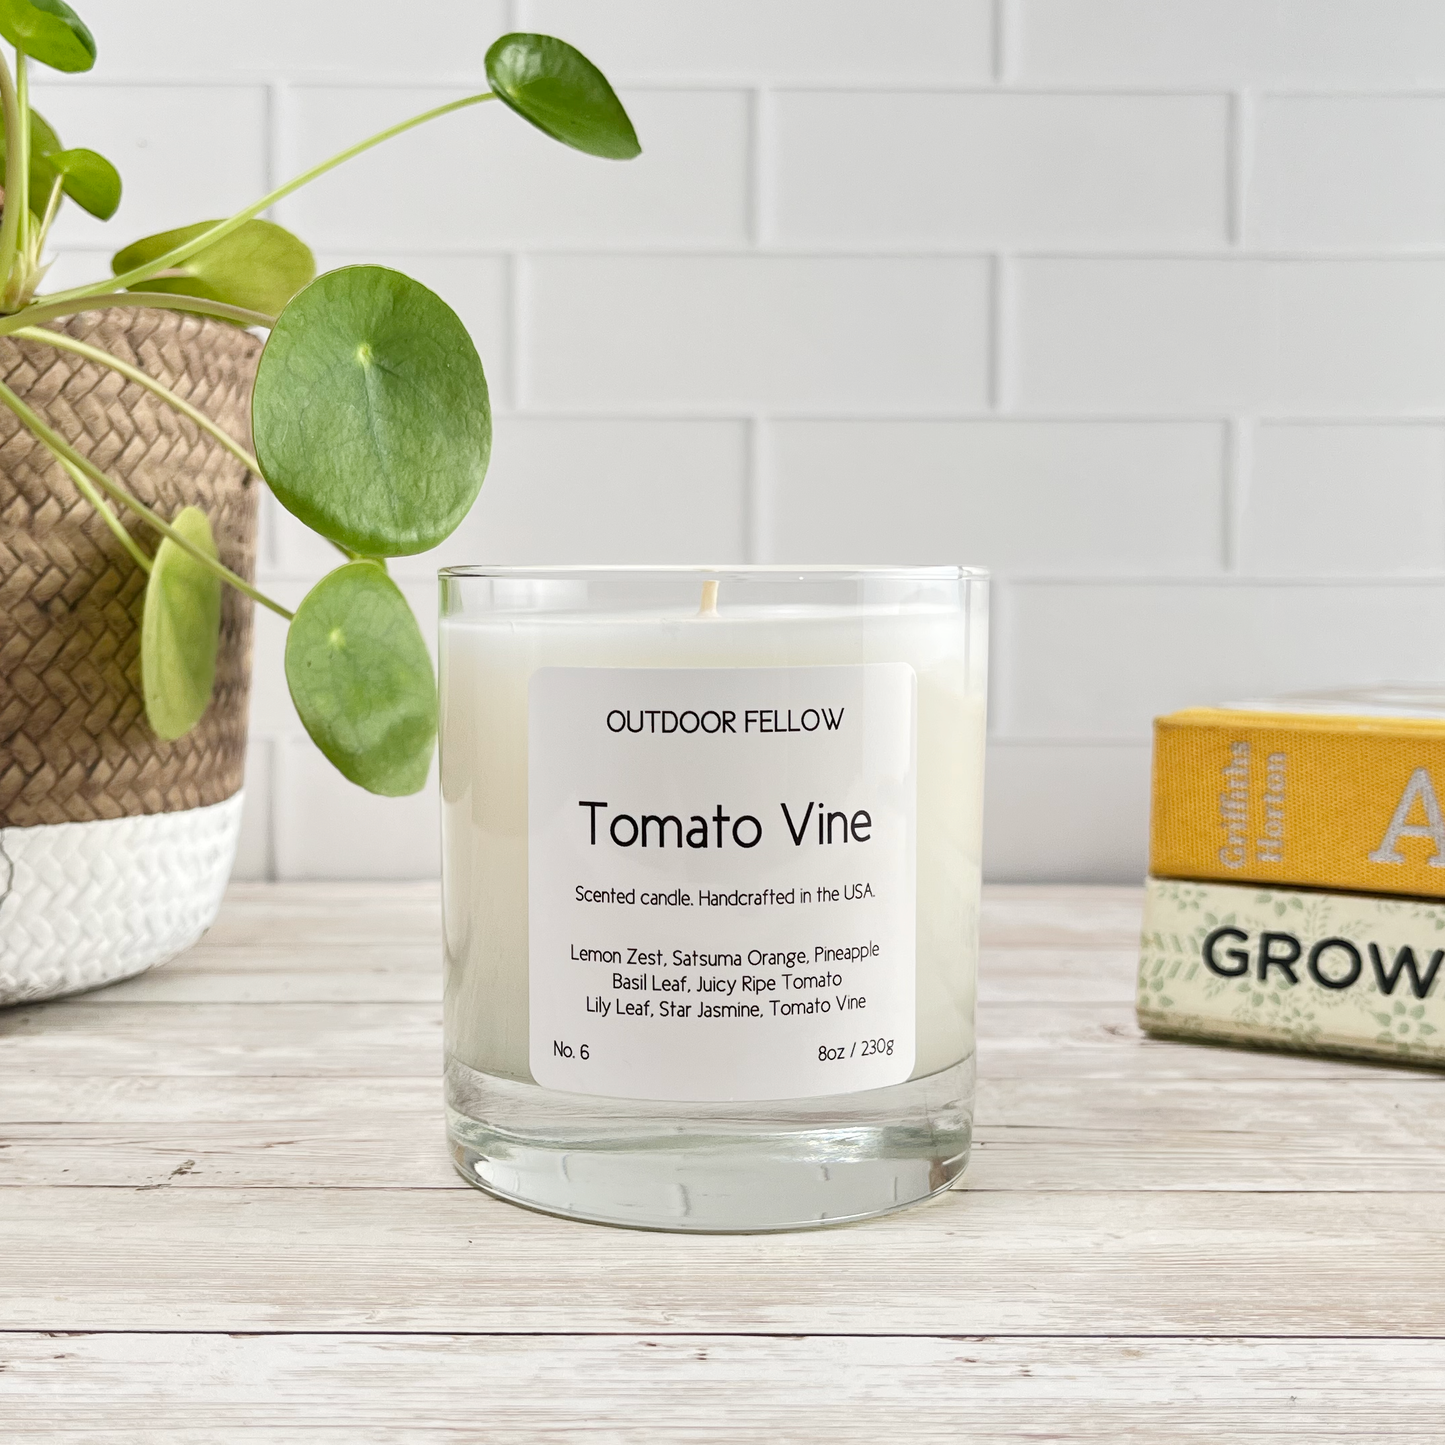 Tomato Vine scented candle on a wood surface in front of a plant and books